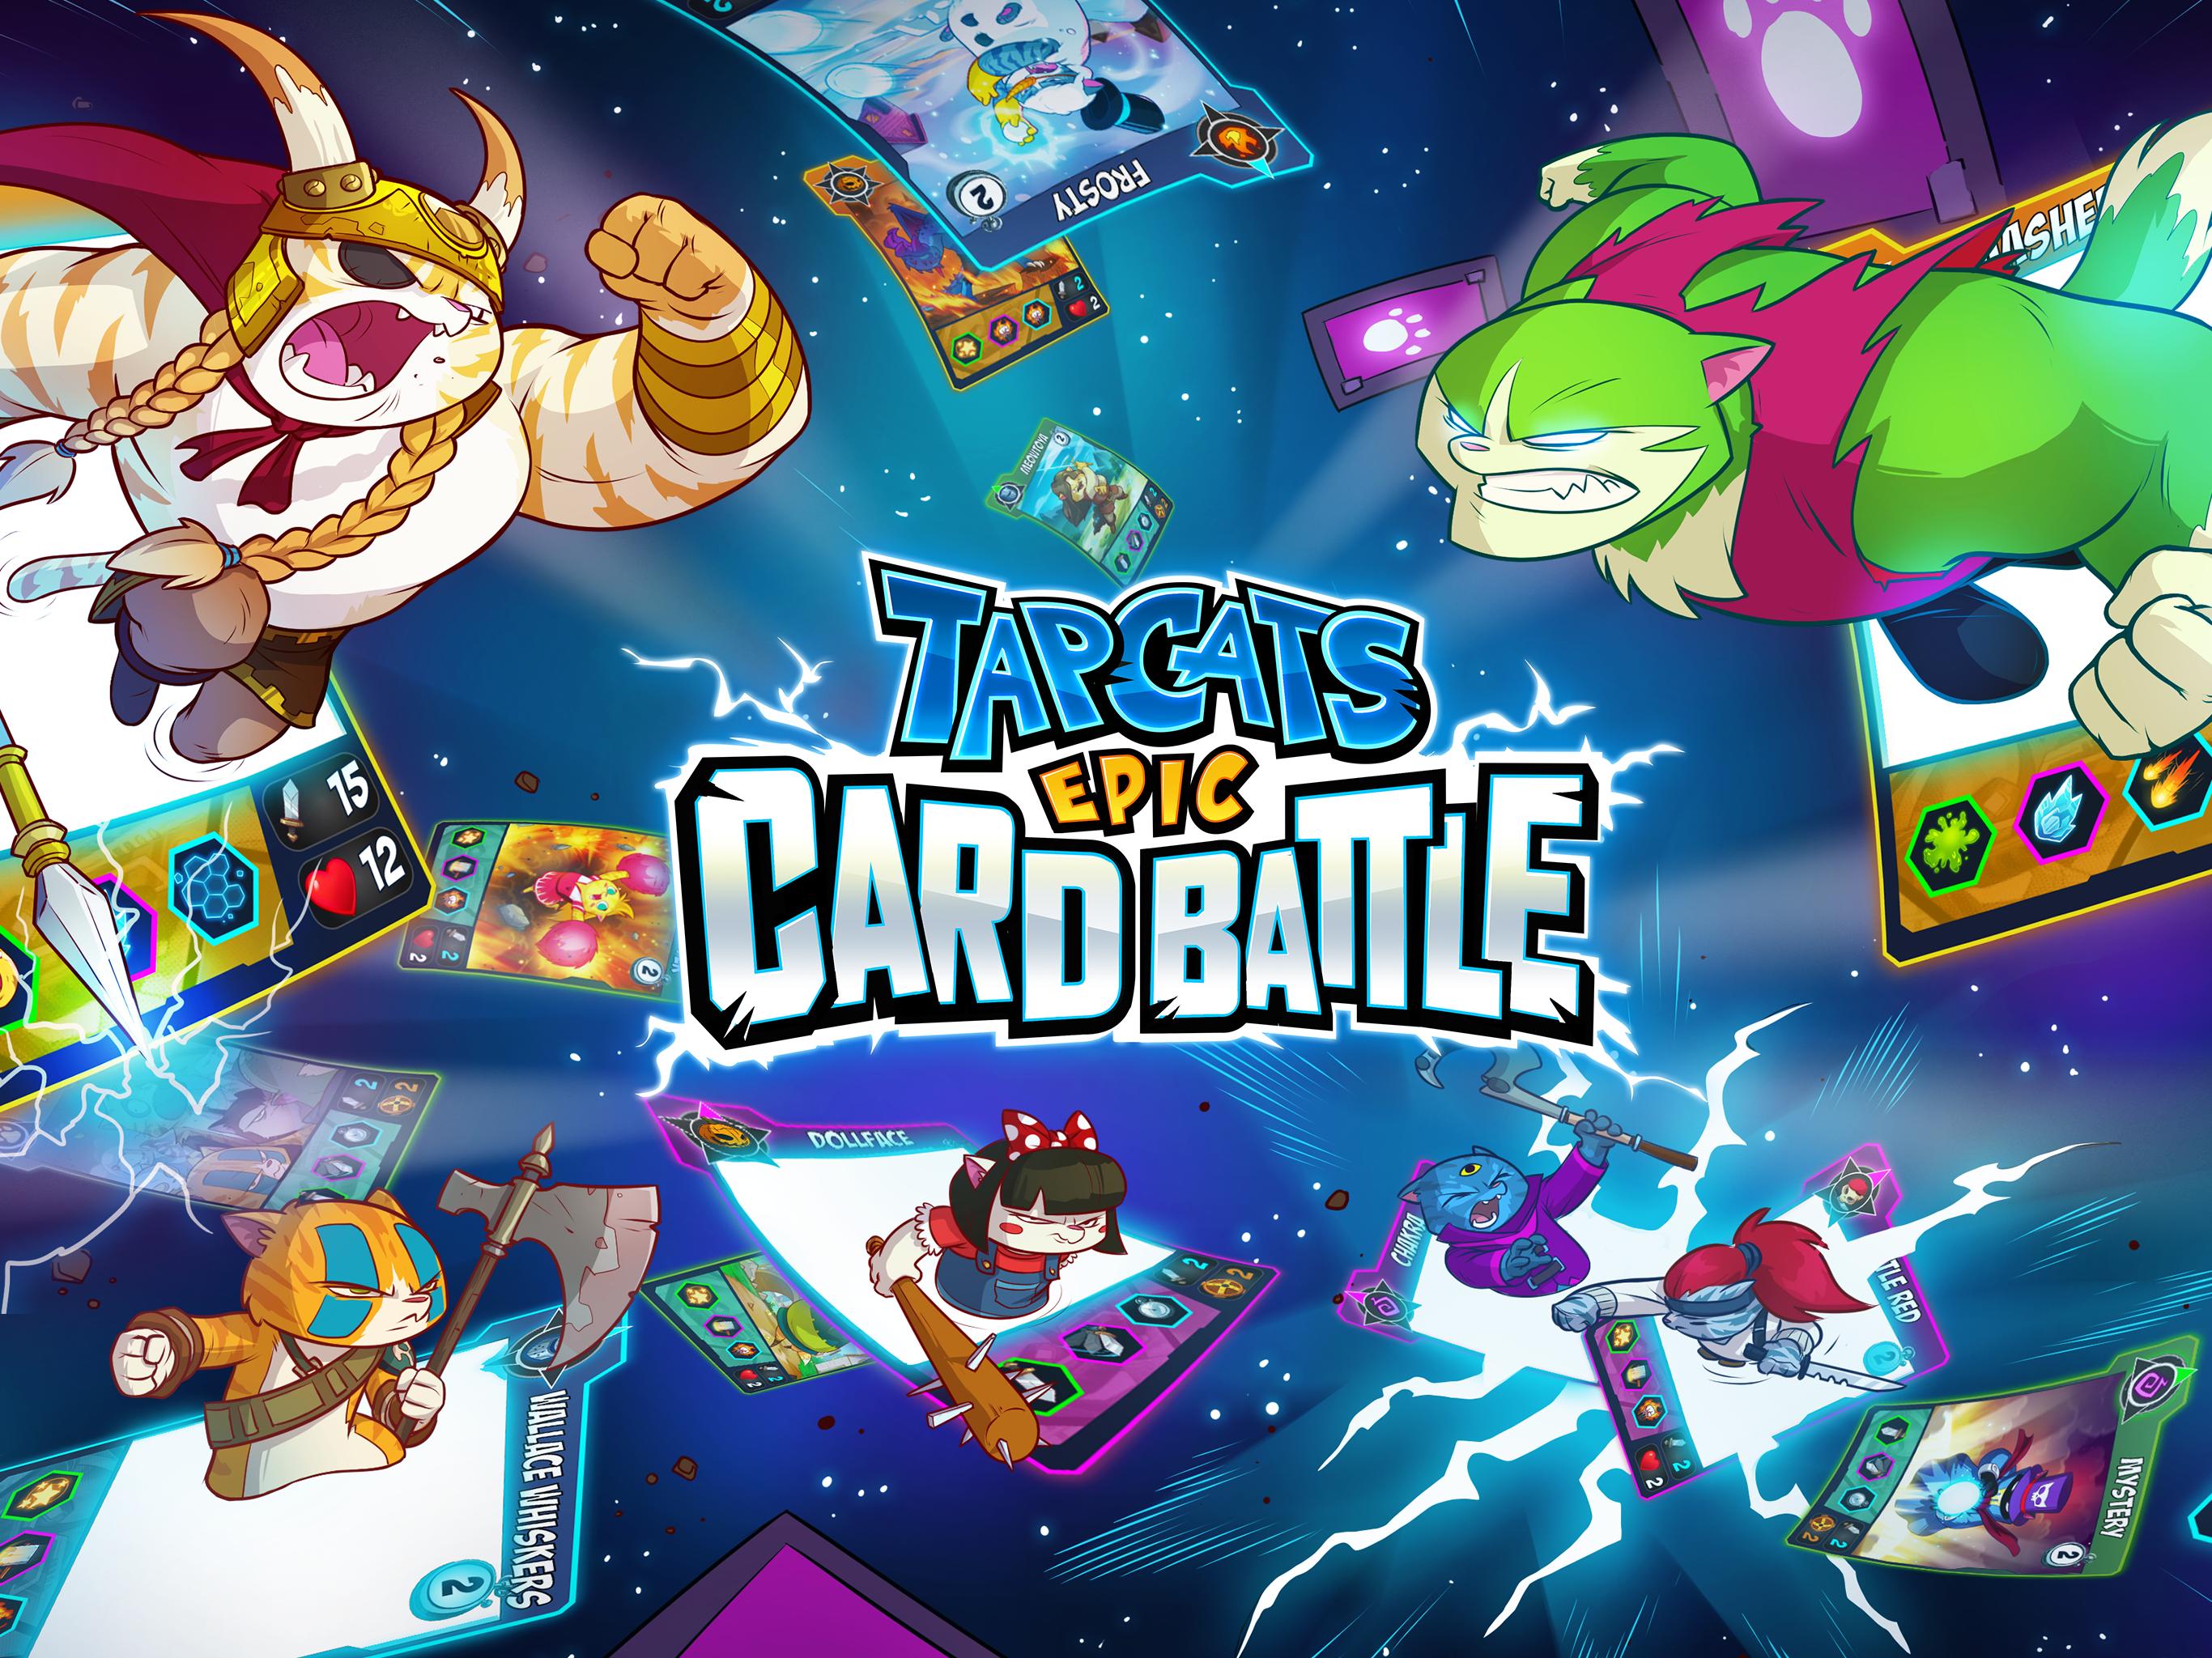 Tap Cats: Epic Card Battle (CCG) for Android - APK Download